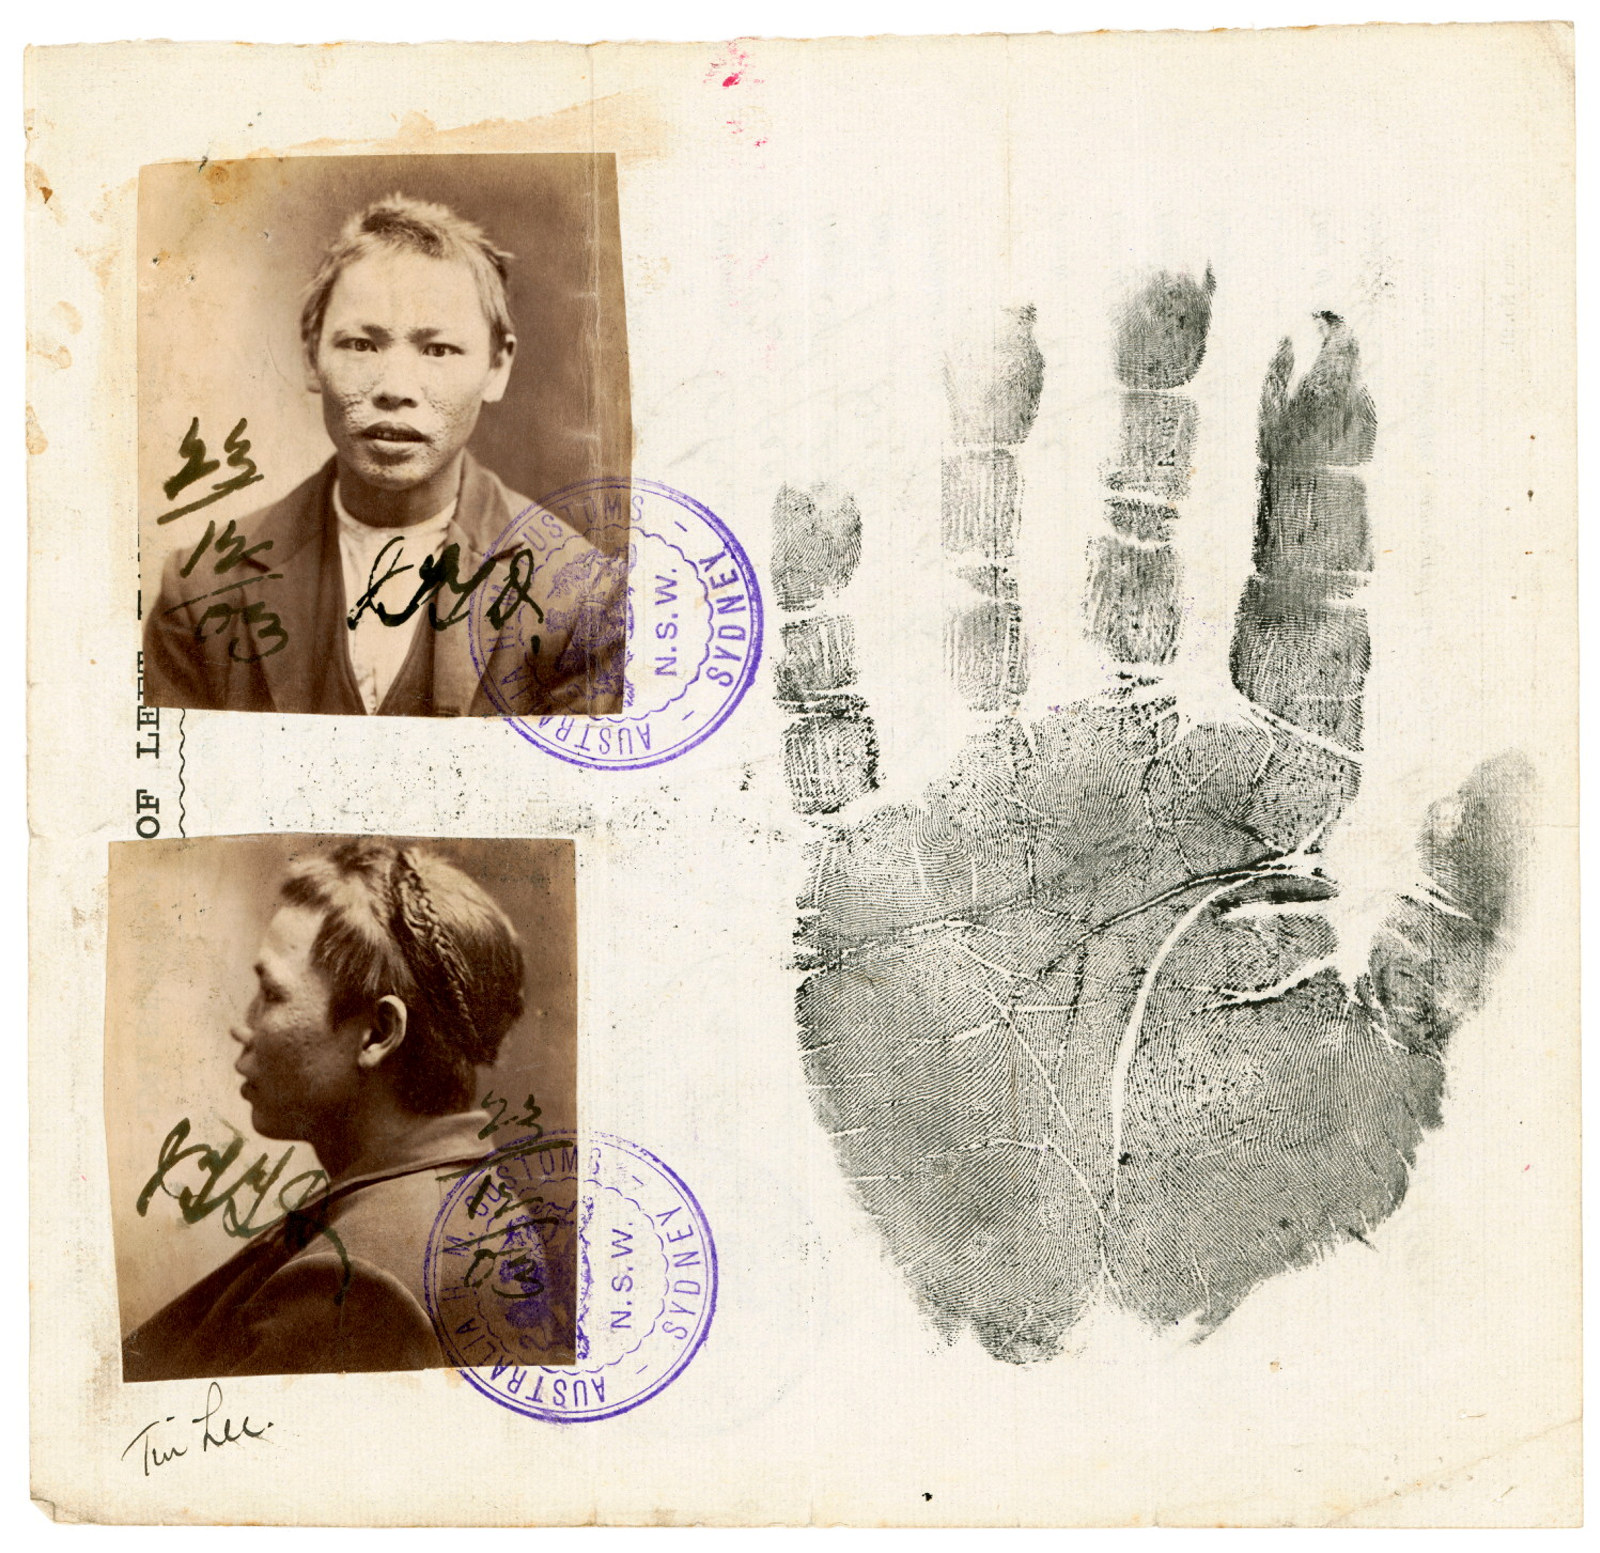 Tin Lee certificate of domicile, incorporating two photographs and left hand impression